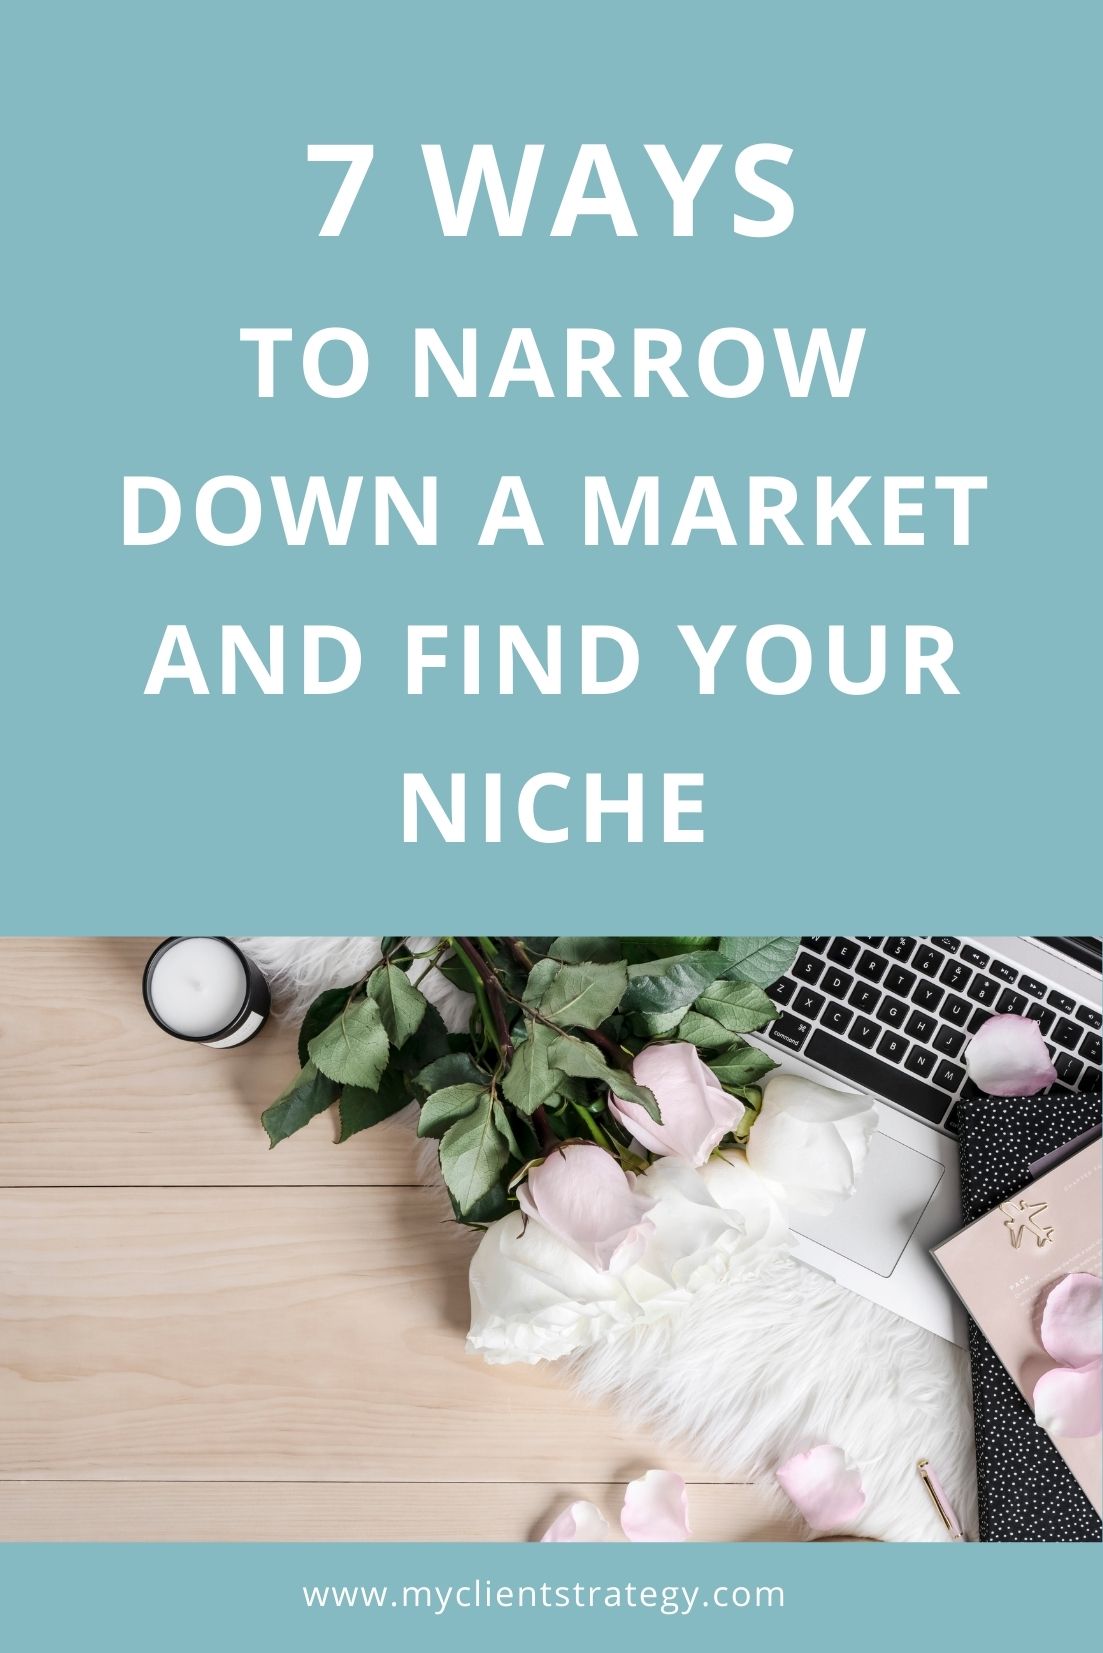 7 ways to narrow down a market and find your niche